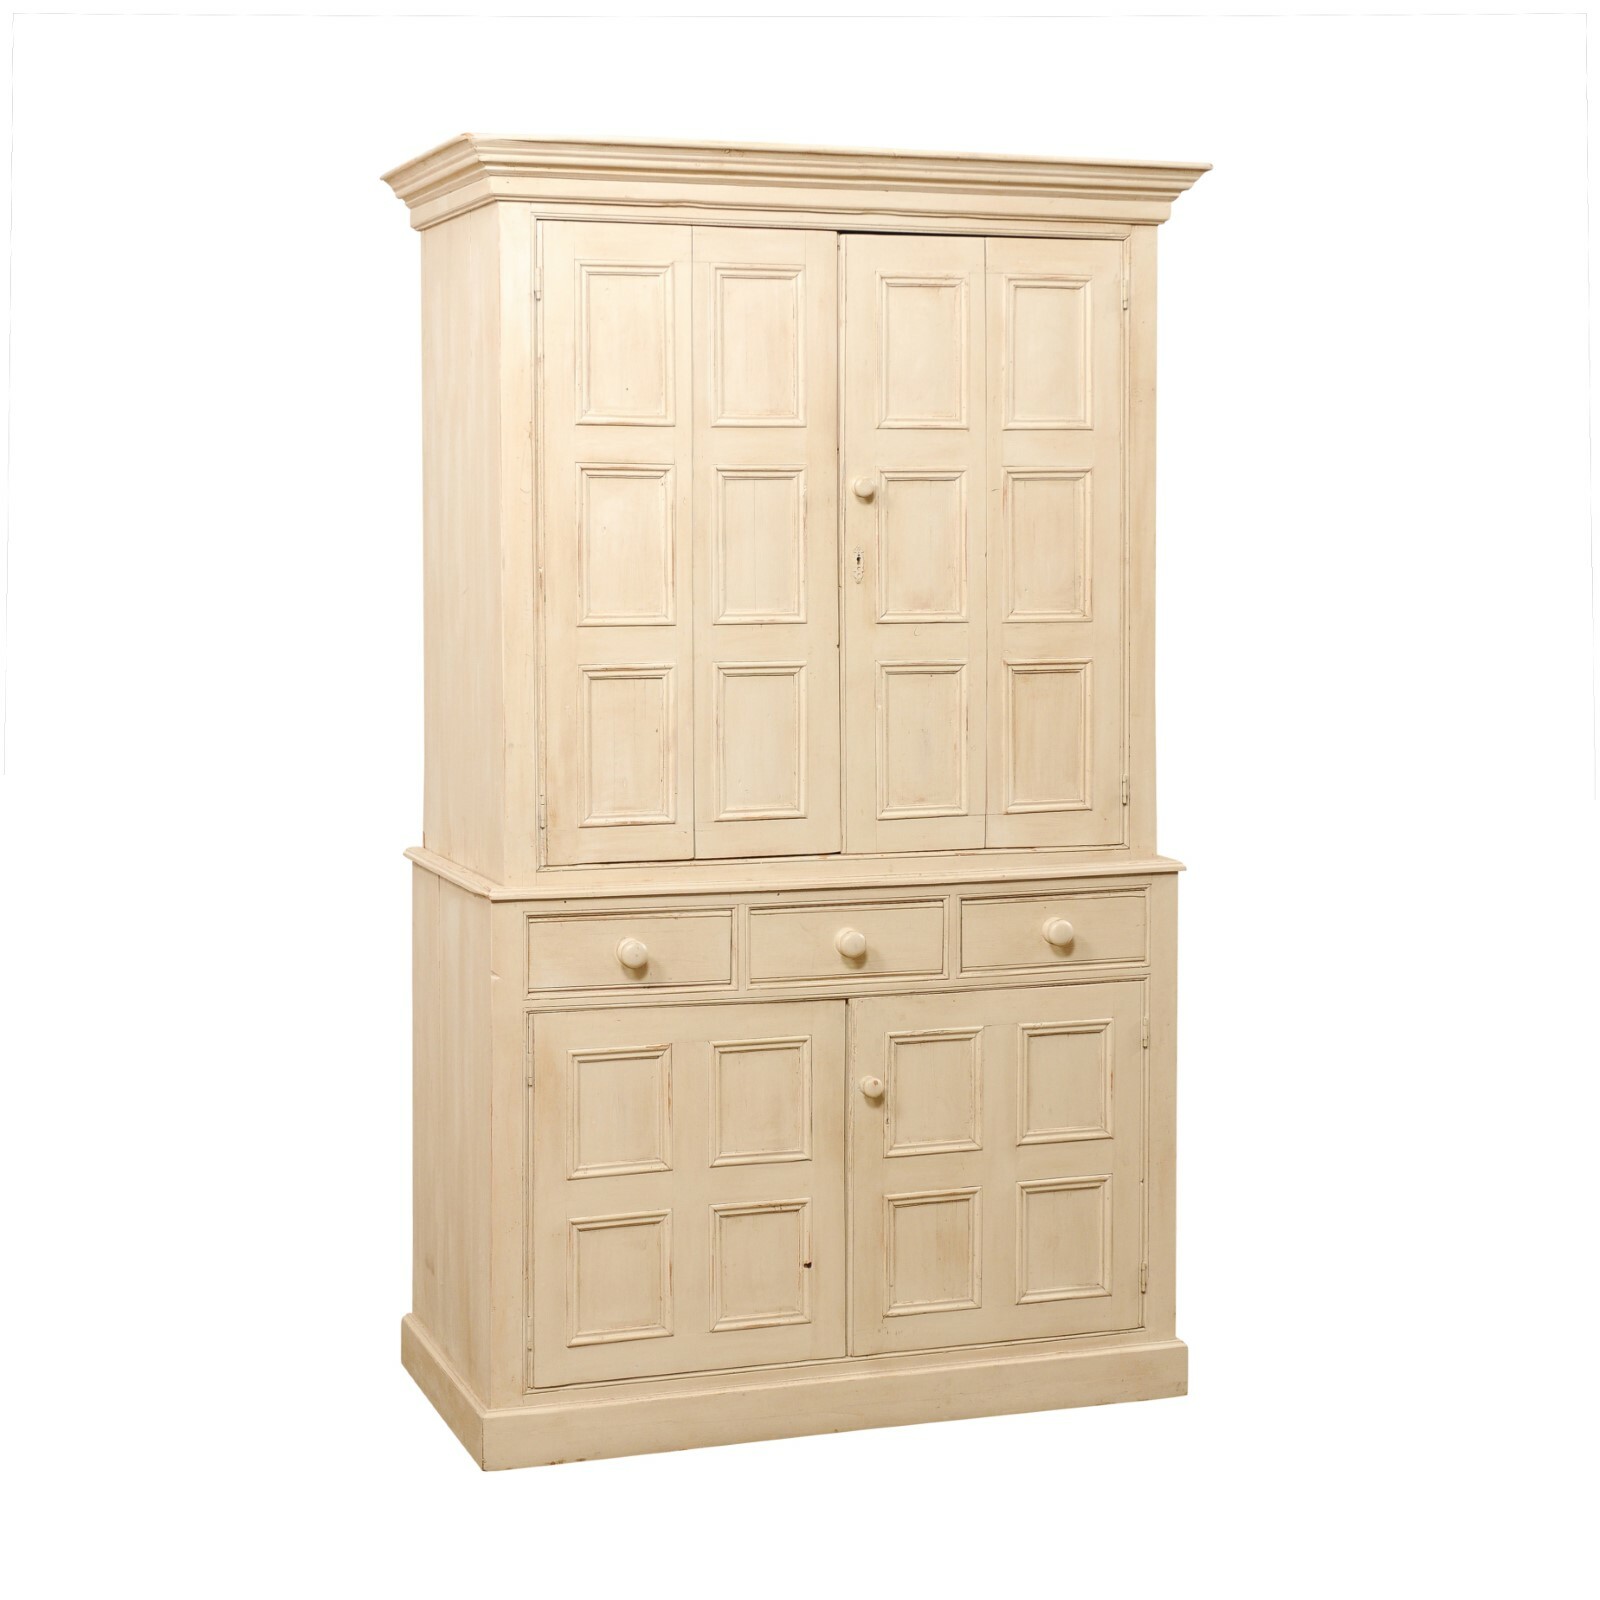 English 7+ Ft. Panel Front Storage Cabinet